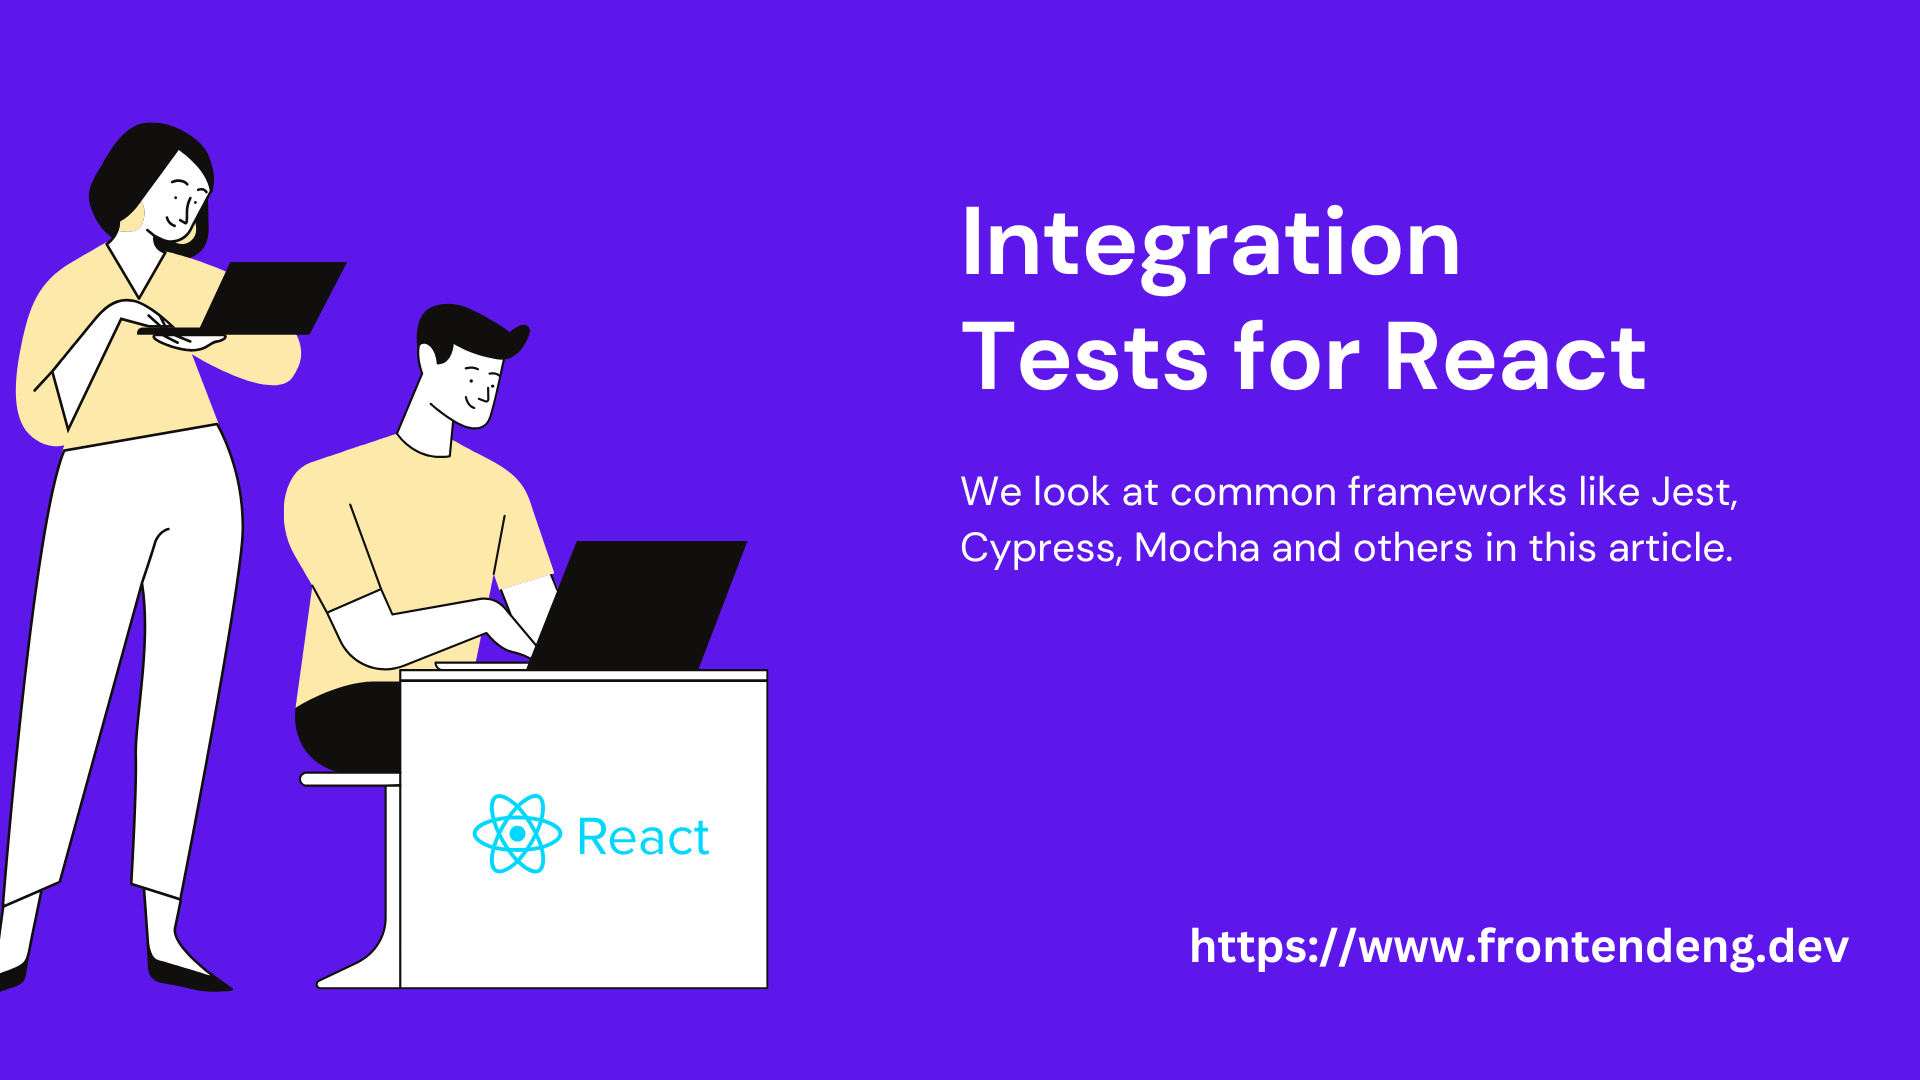 Integration testing in React